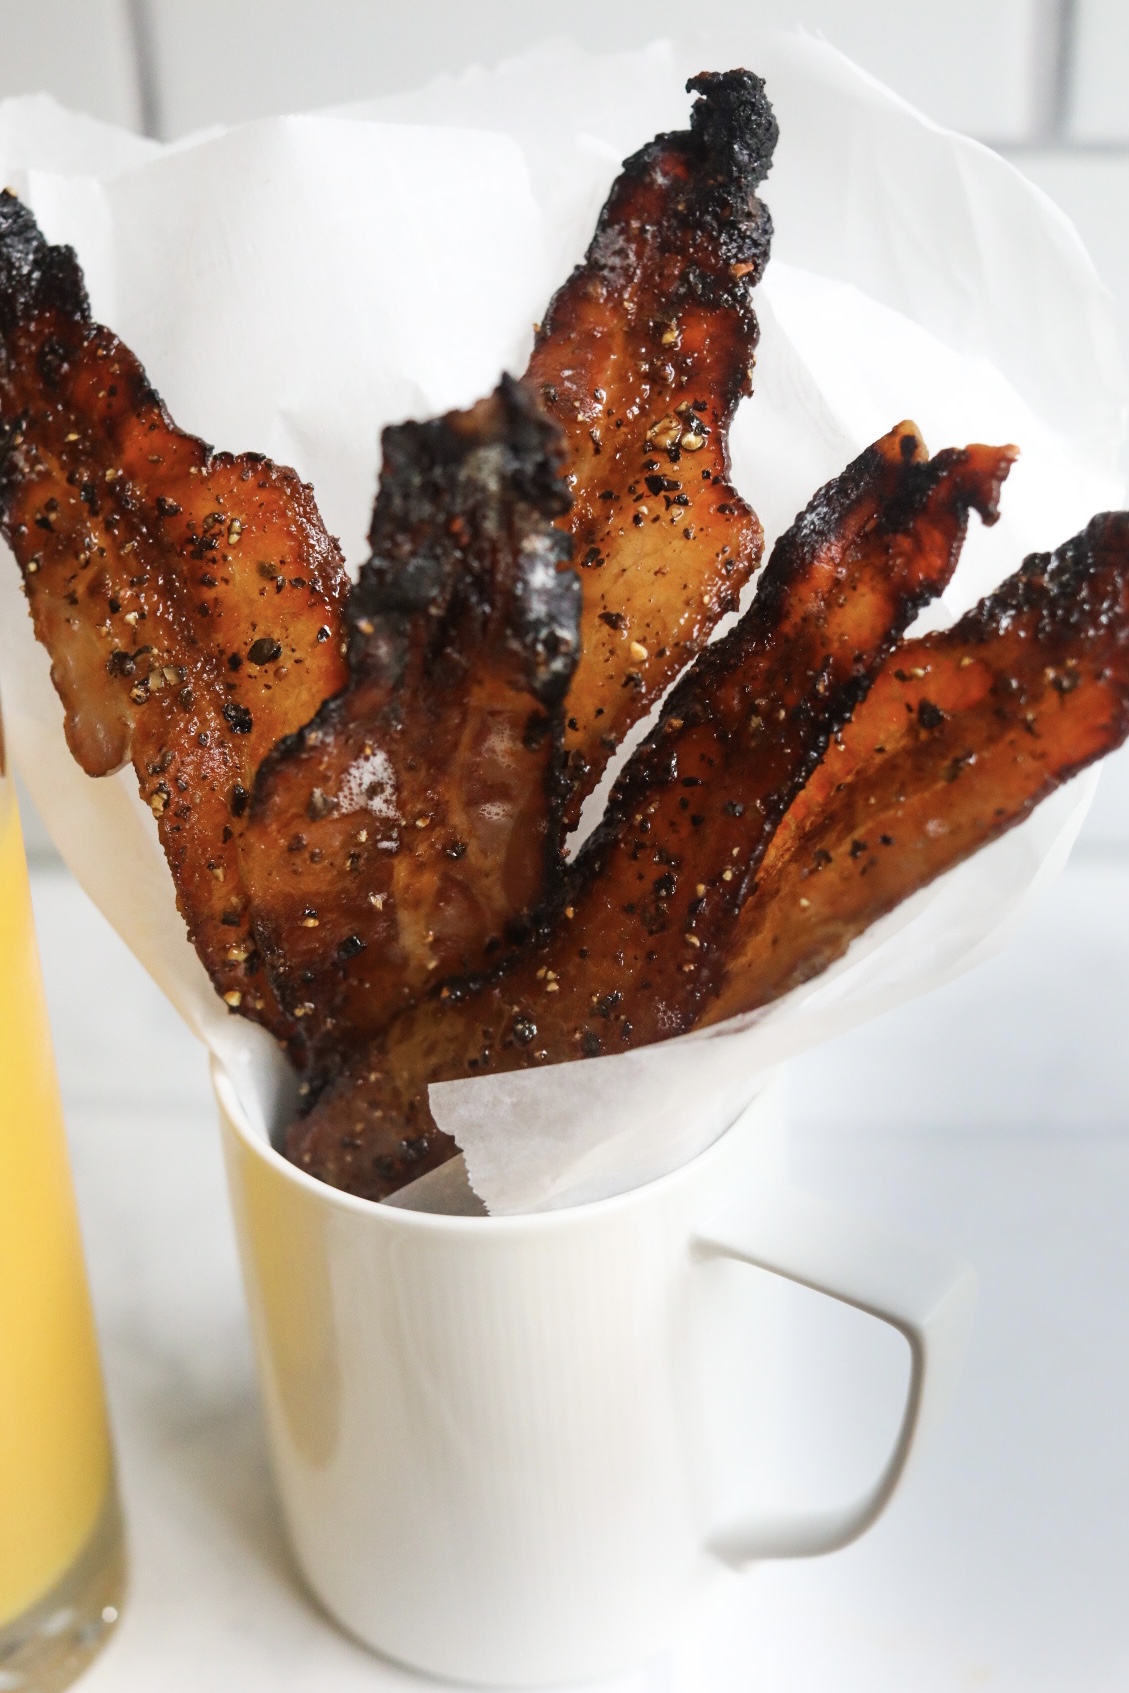 Candied bacon in white coffee mug, stuffed with white parchment paper. Glass of orange juice is slightly shown for styling purposes.